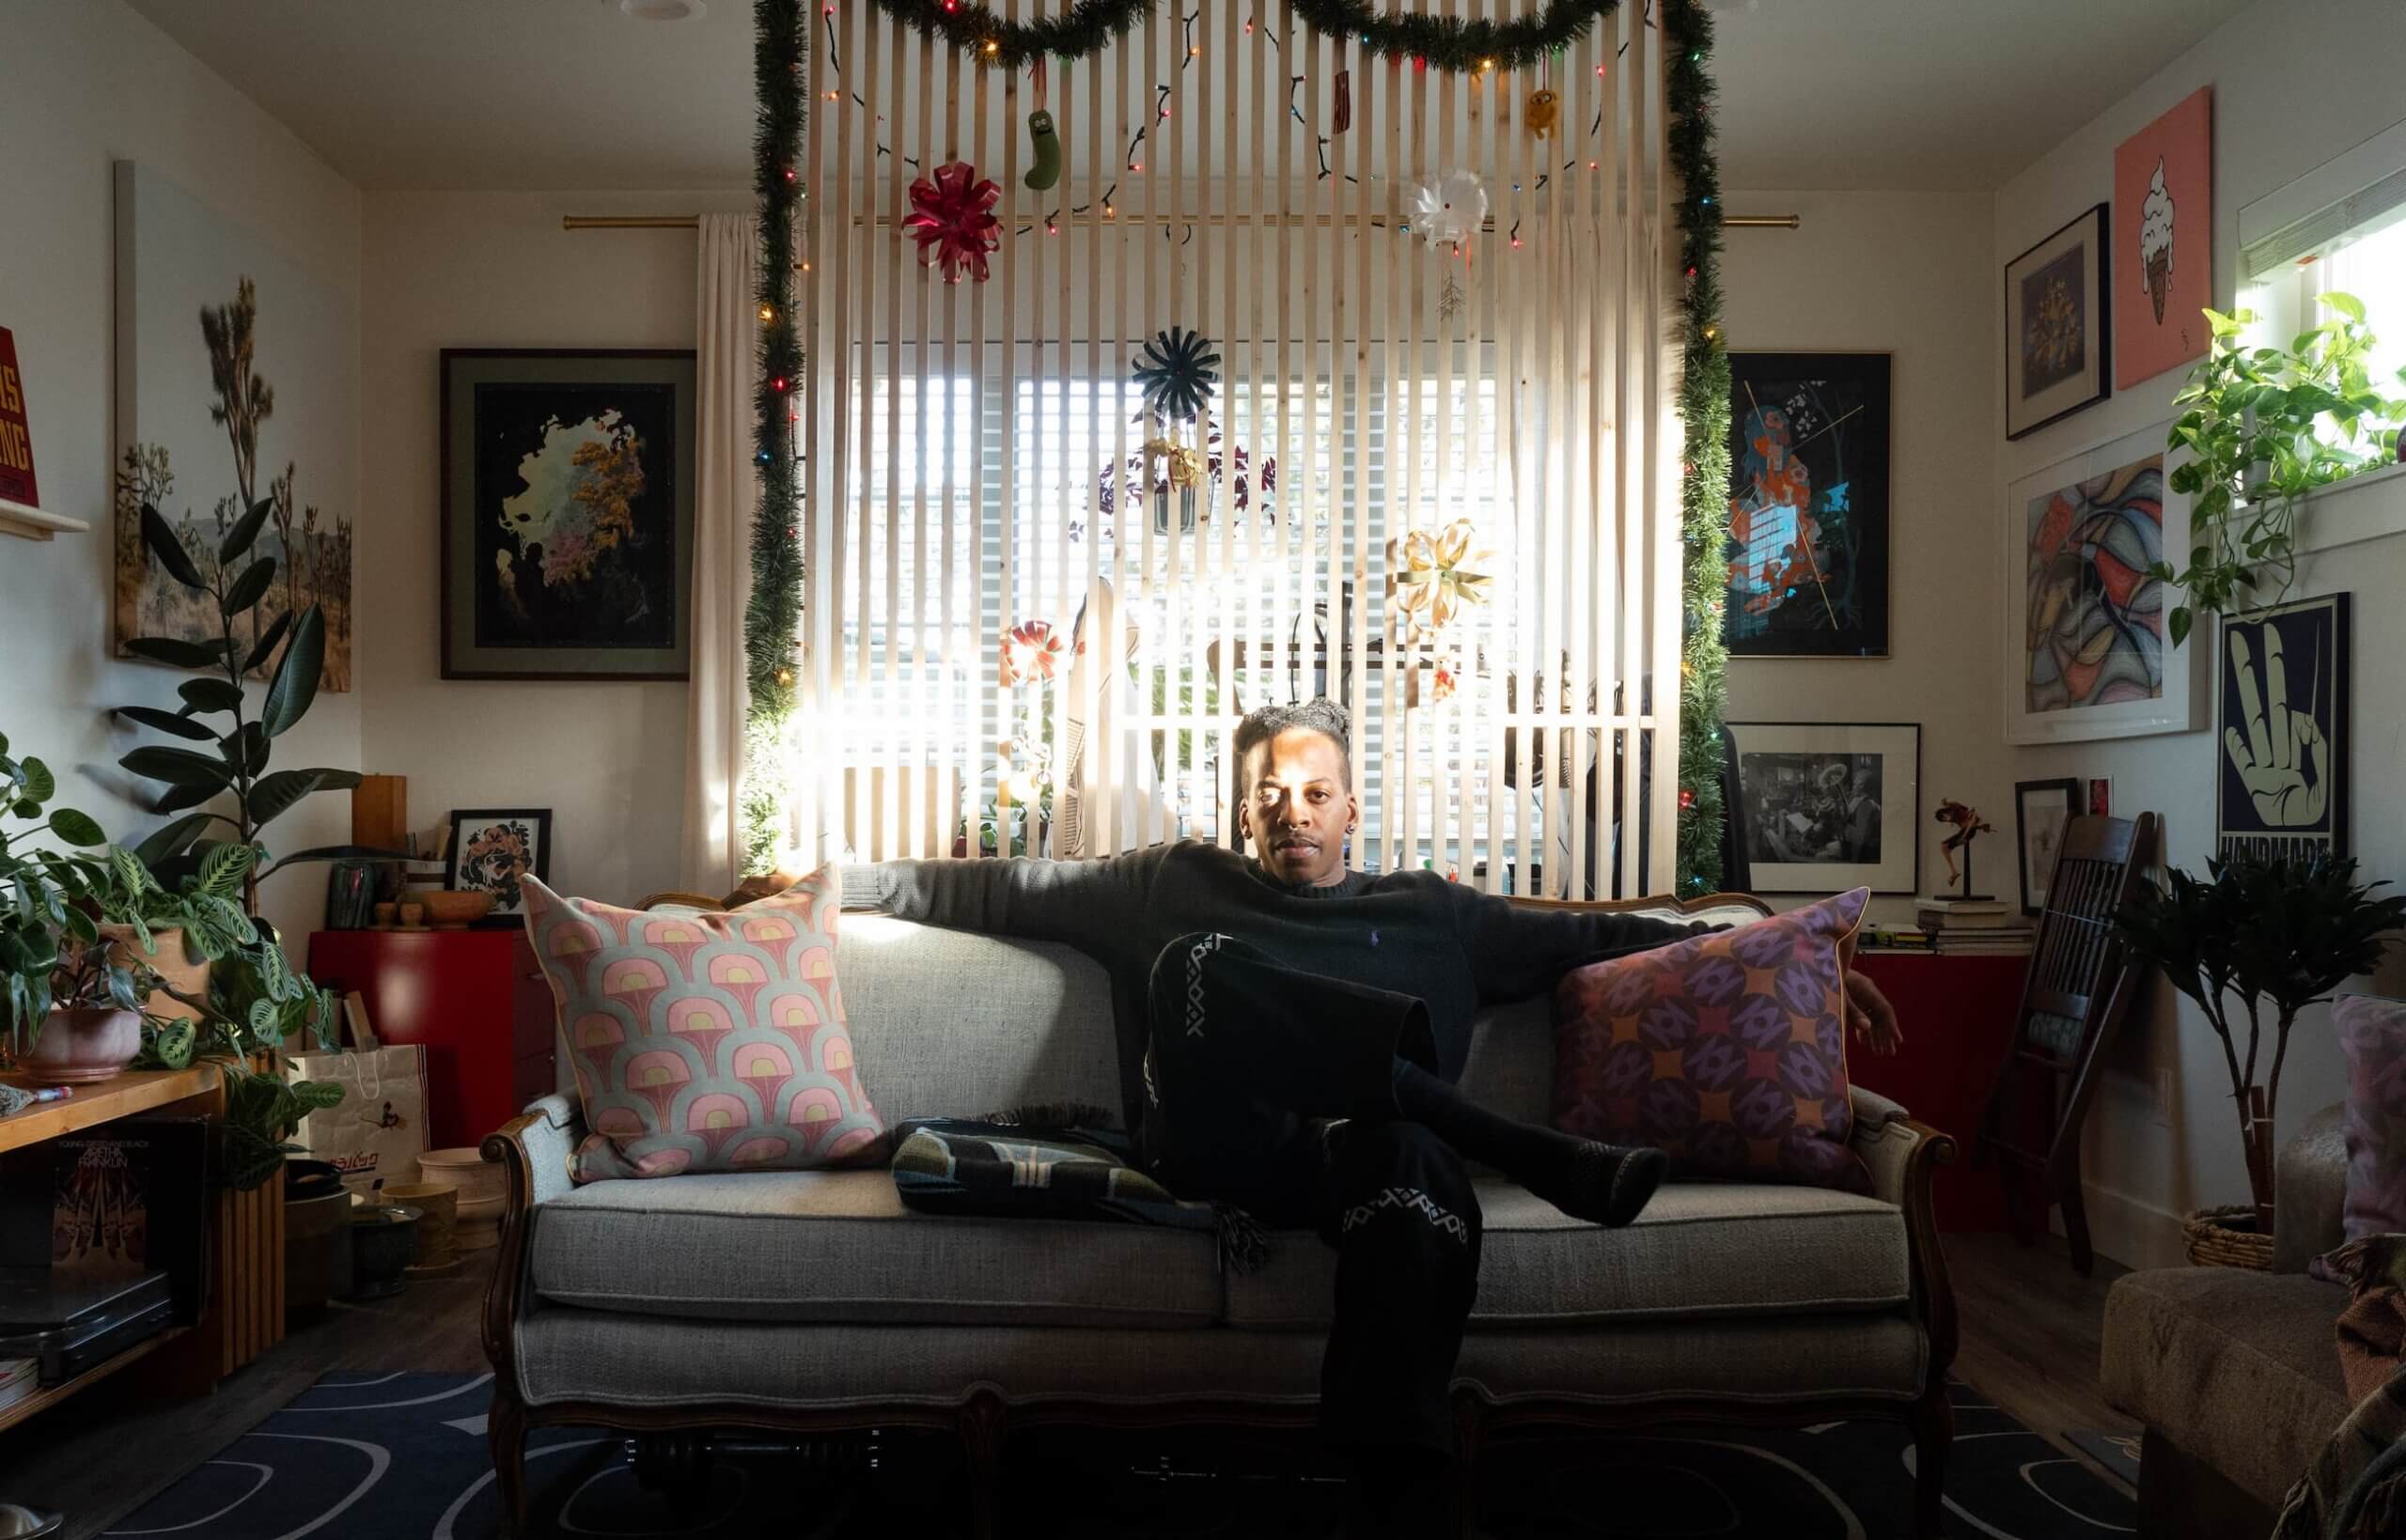 Phillip sitting on the couch of his last rental he decorated